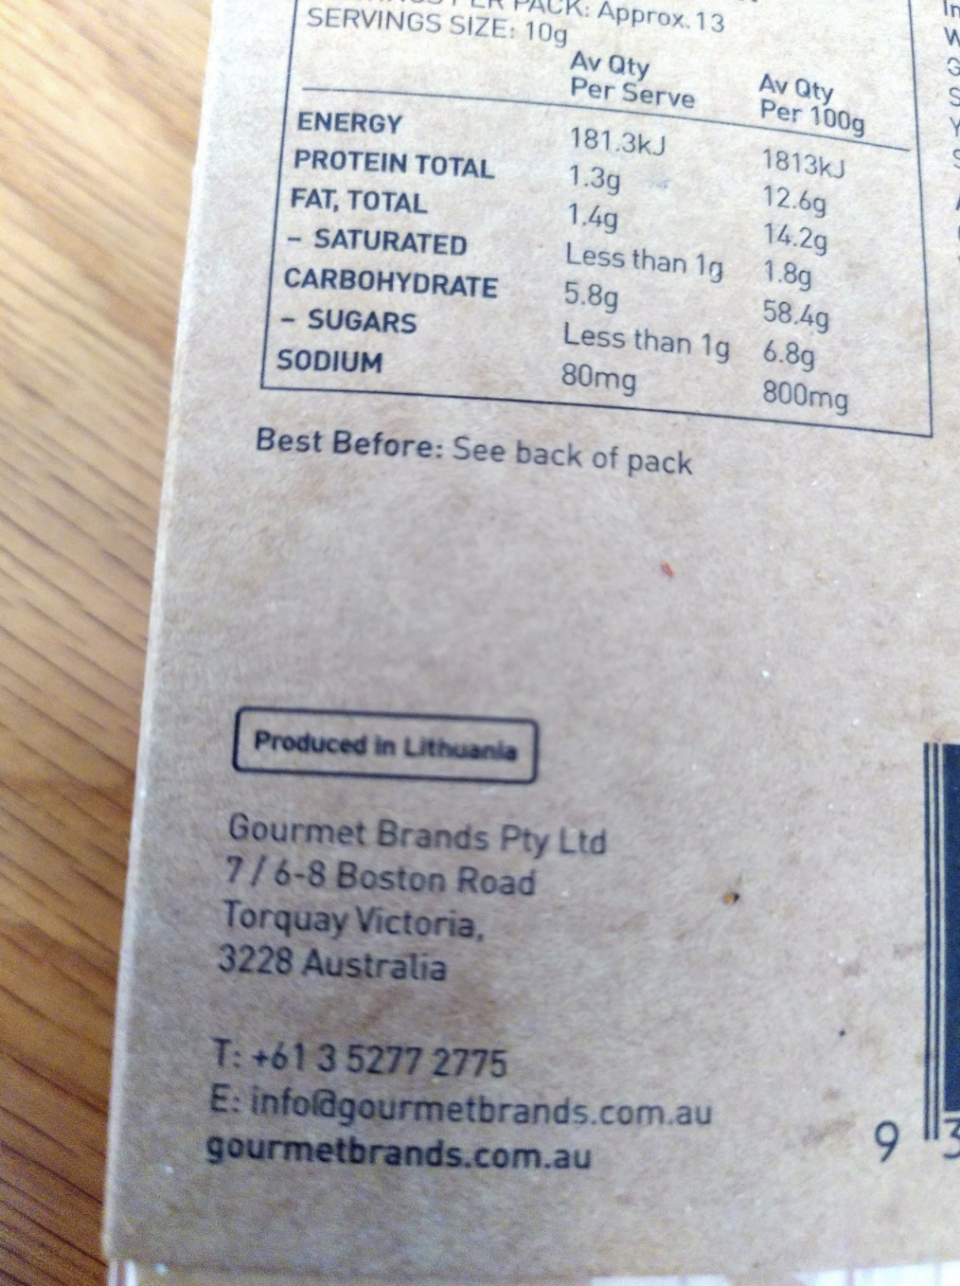 Back of crackers pack stating they're produced in Lithuania.